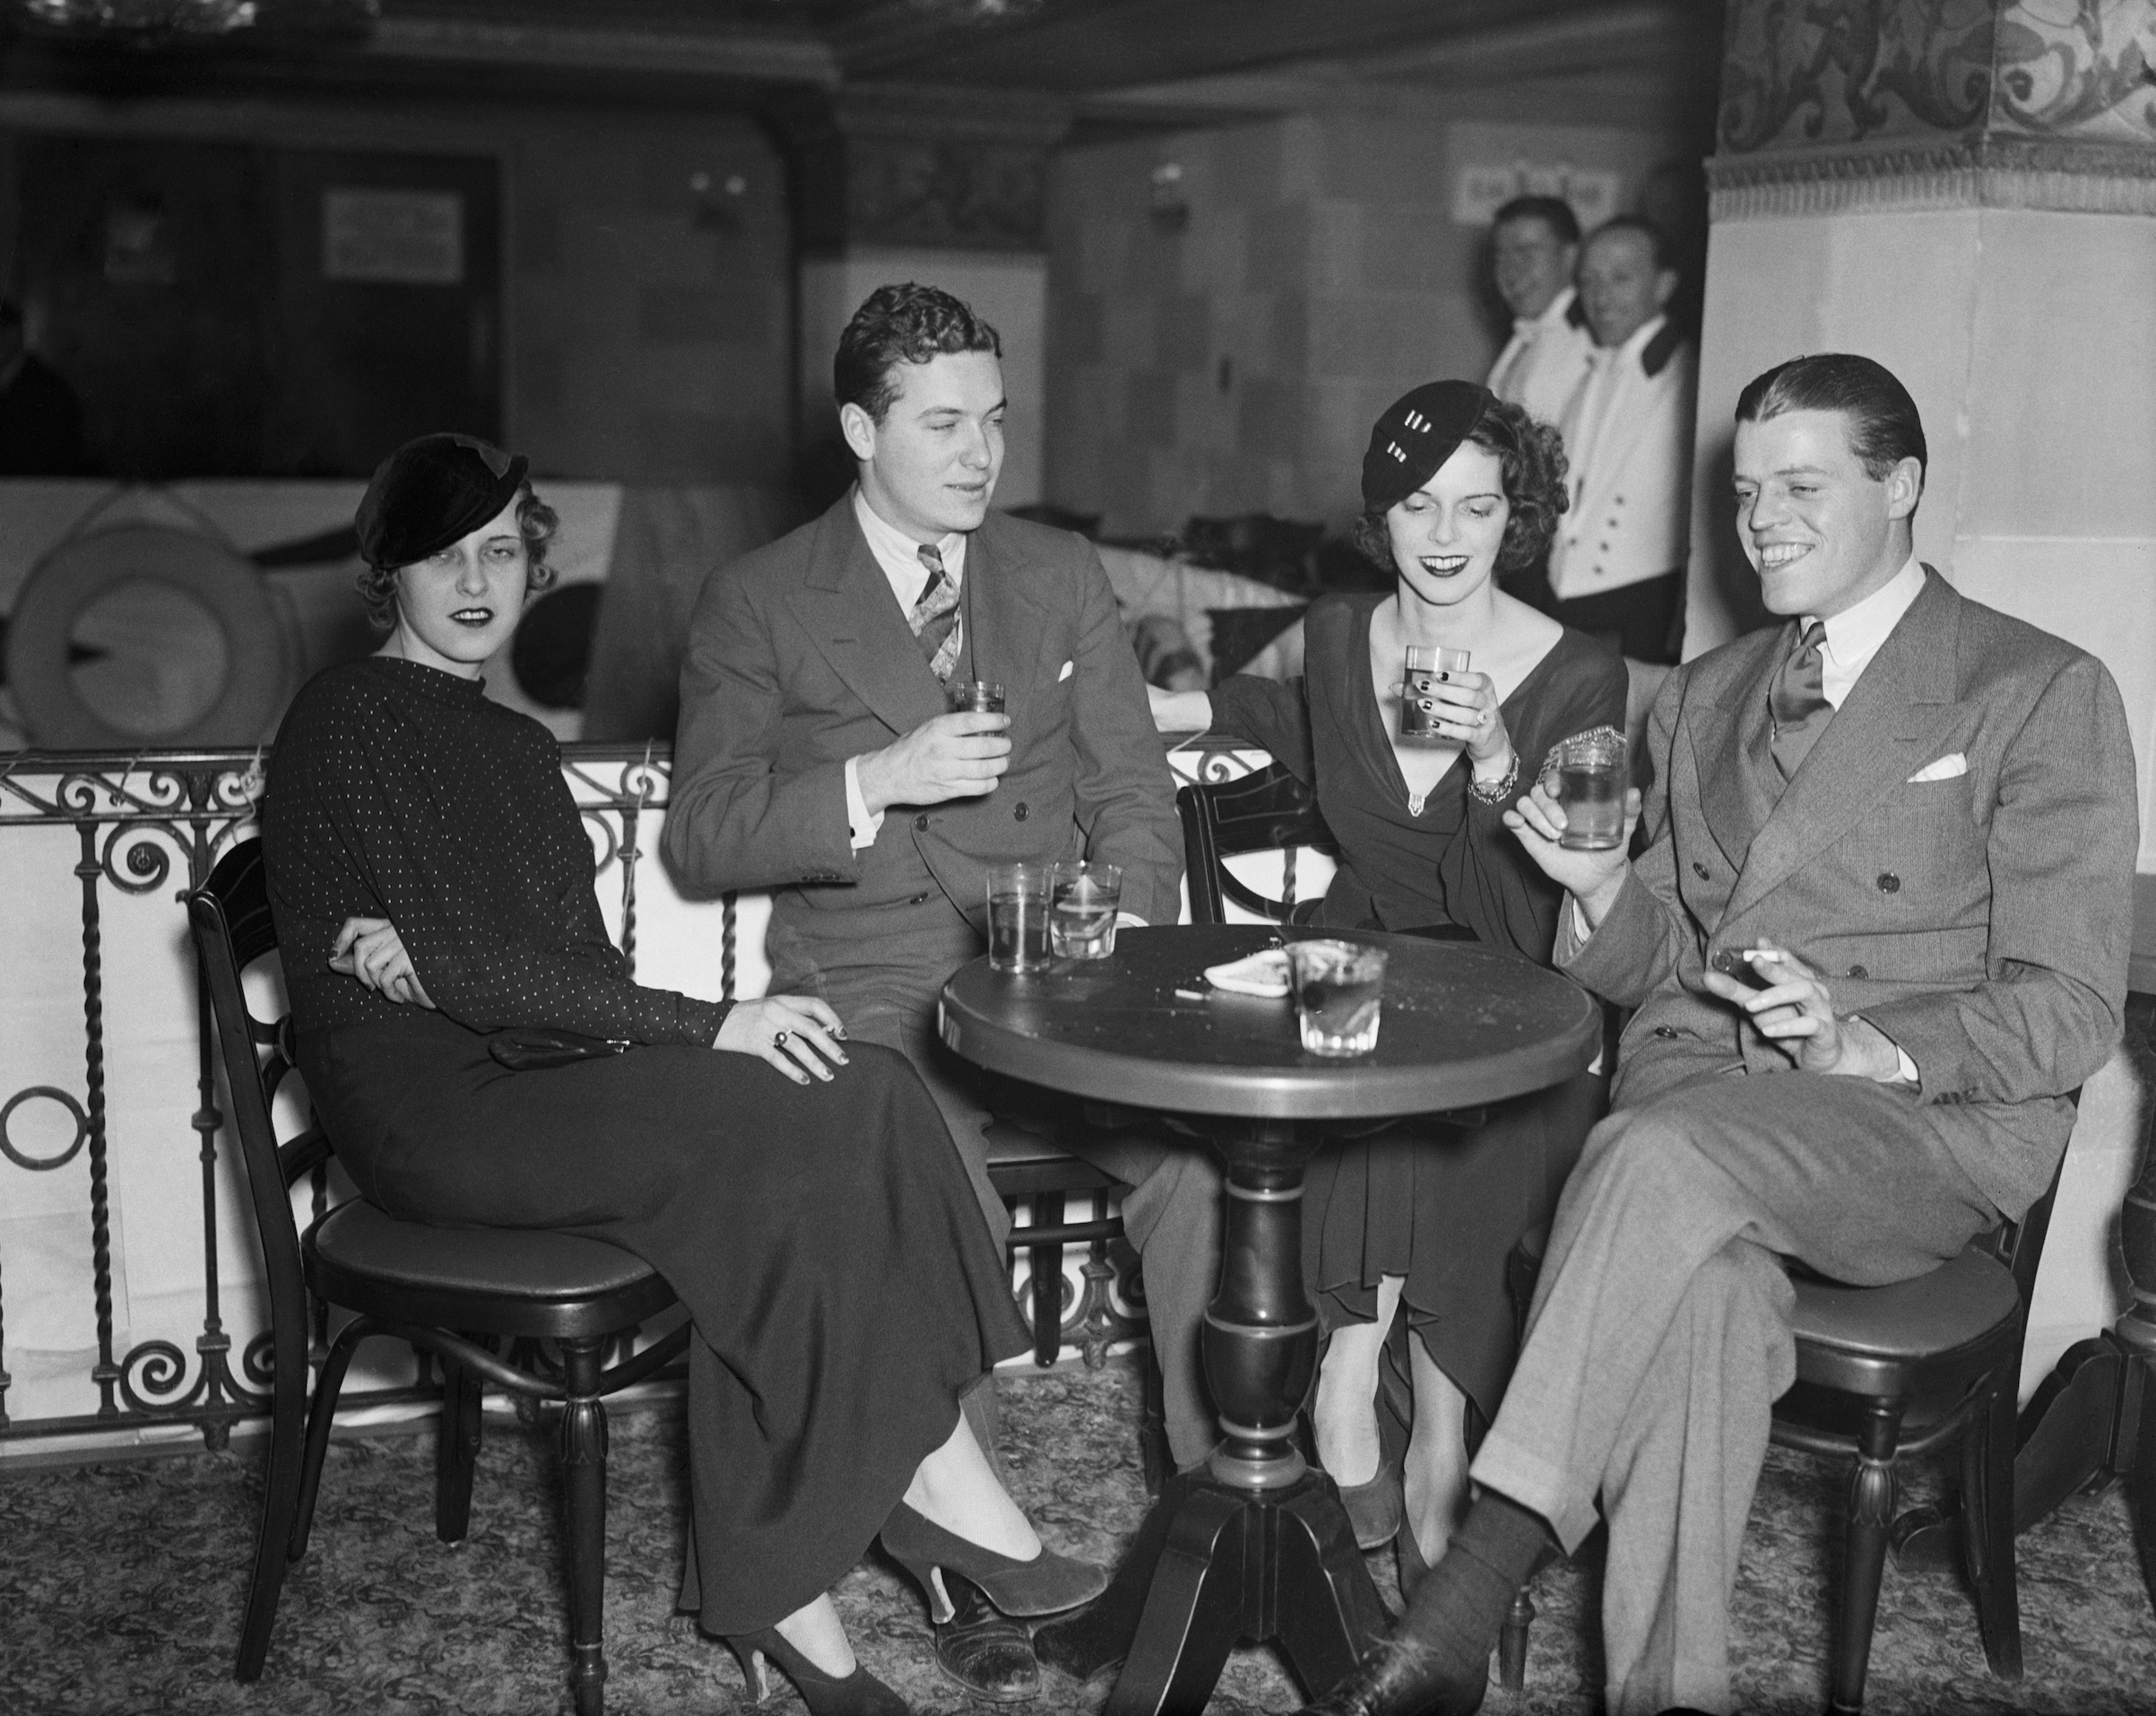 On Nov. 30, 1933, Knickerbocker society luminaries turned for Major and Mrs. S. Fullerton Weaver's Thanksgiving "Cocktail cruise" aboard the "Good Ship Park Lane Cafe." Among the "passengers" were (left to right), Miss Dorothy McElphone, Edmund Sheedy and Mr. and Mrs. G.T. Wilde. (Bettmann/Getty Images)